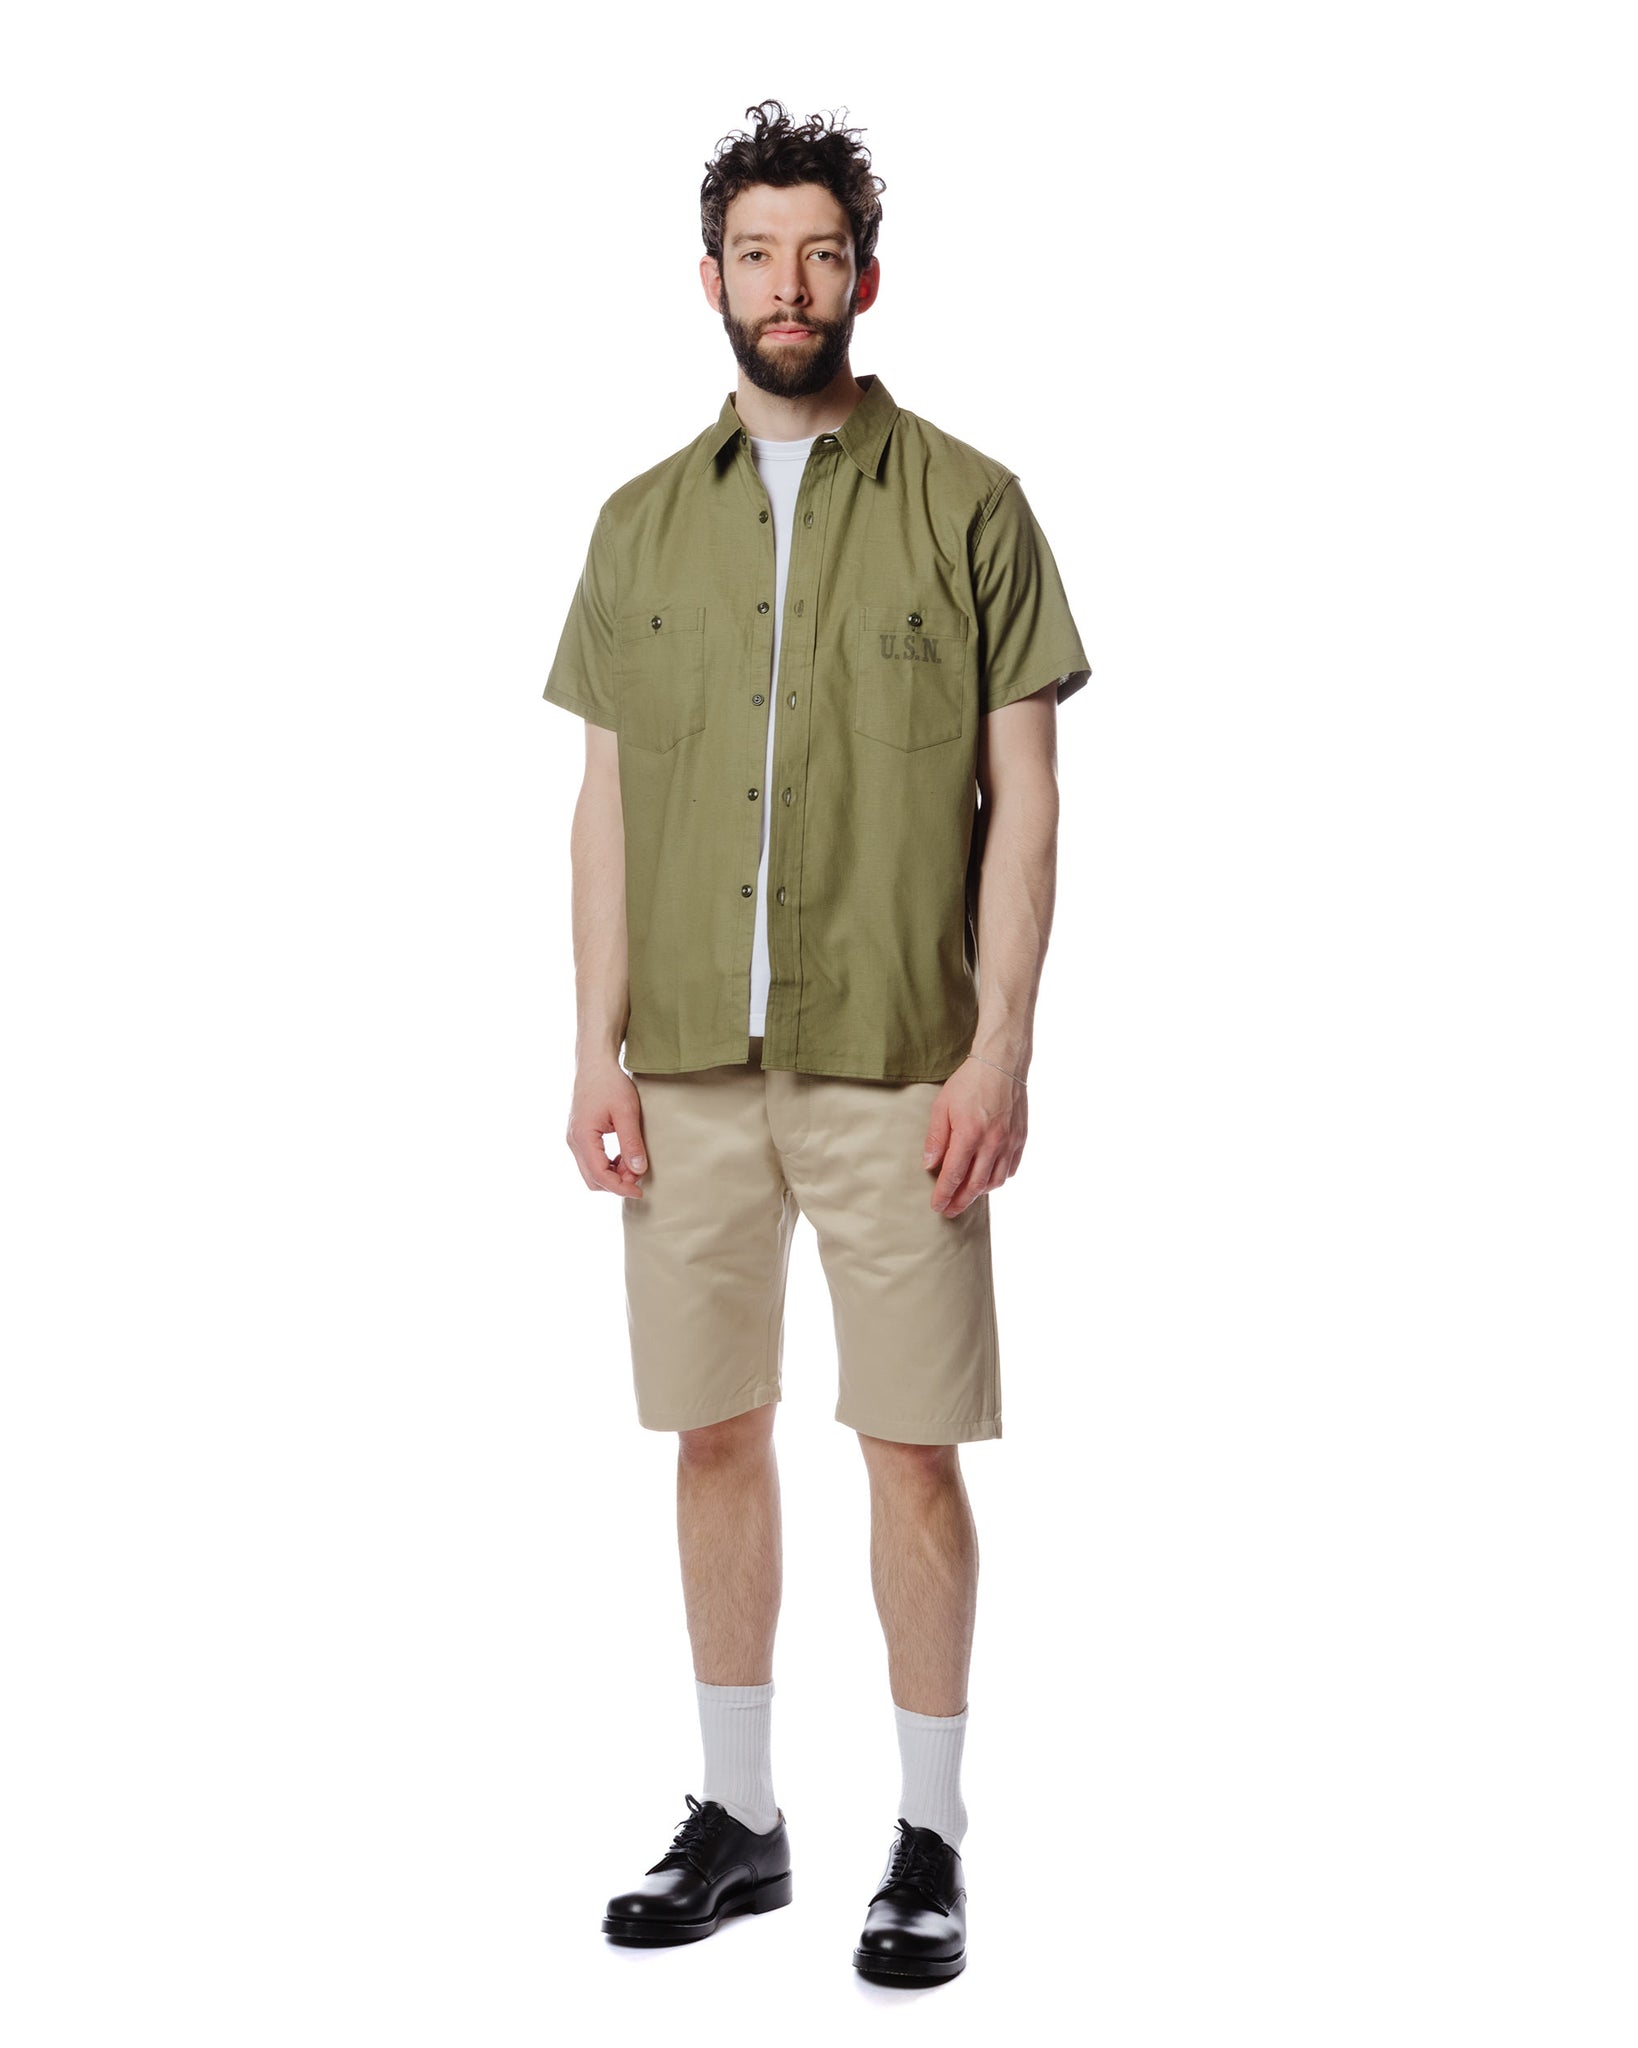 The Real McCoy's MS19017 N-3 Utility Shirt S/S Olive Model